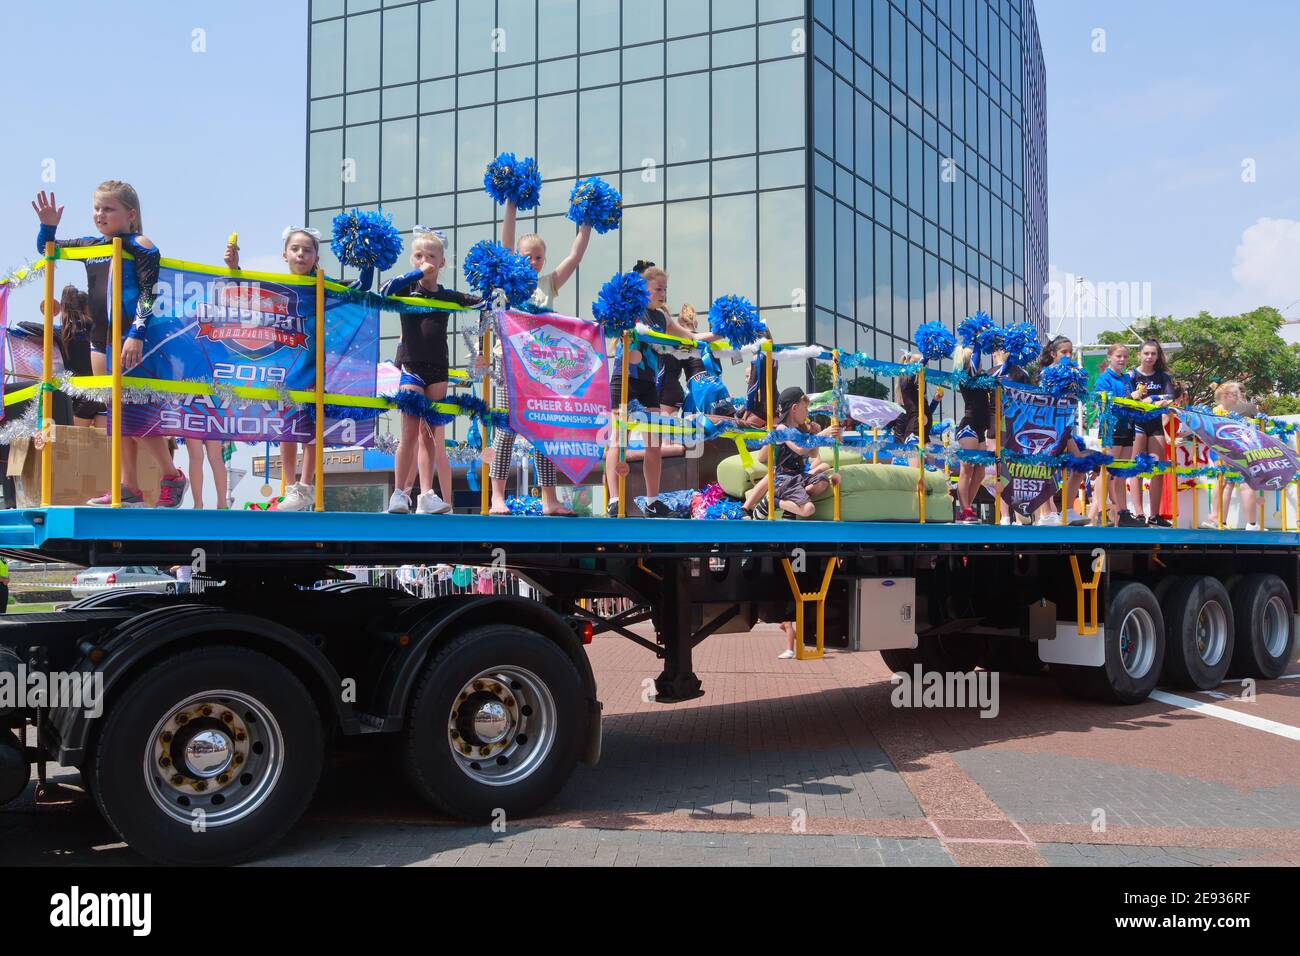 Young cheerleaders riding in the back of a truck and waving their pompoms at a Christmas parade in Tauranga, New Zealand Stock Photo